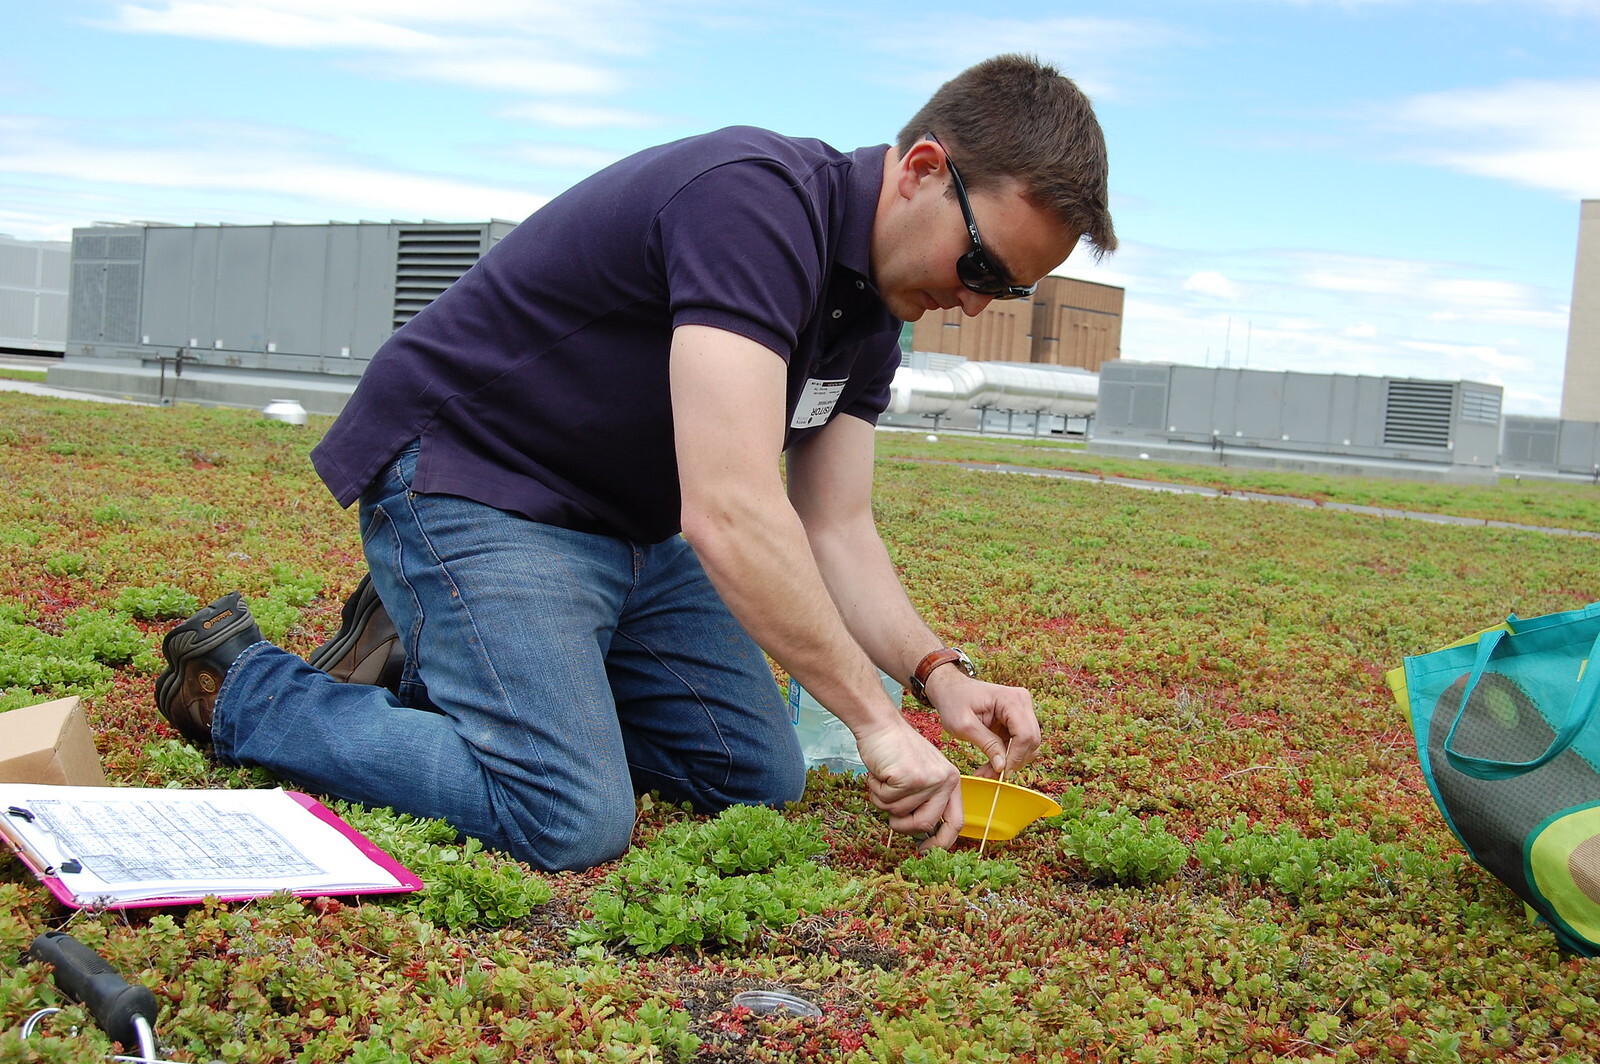 Dr. Partridge samples arthropods in the sedum of the Jacob K. Javits Convention Center green roof. Photo: NYC Bird Alliance